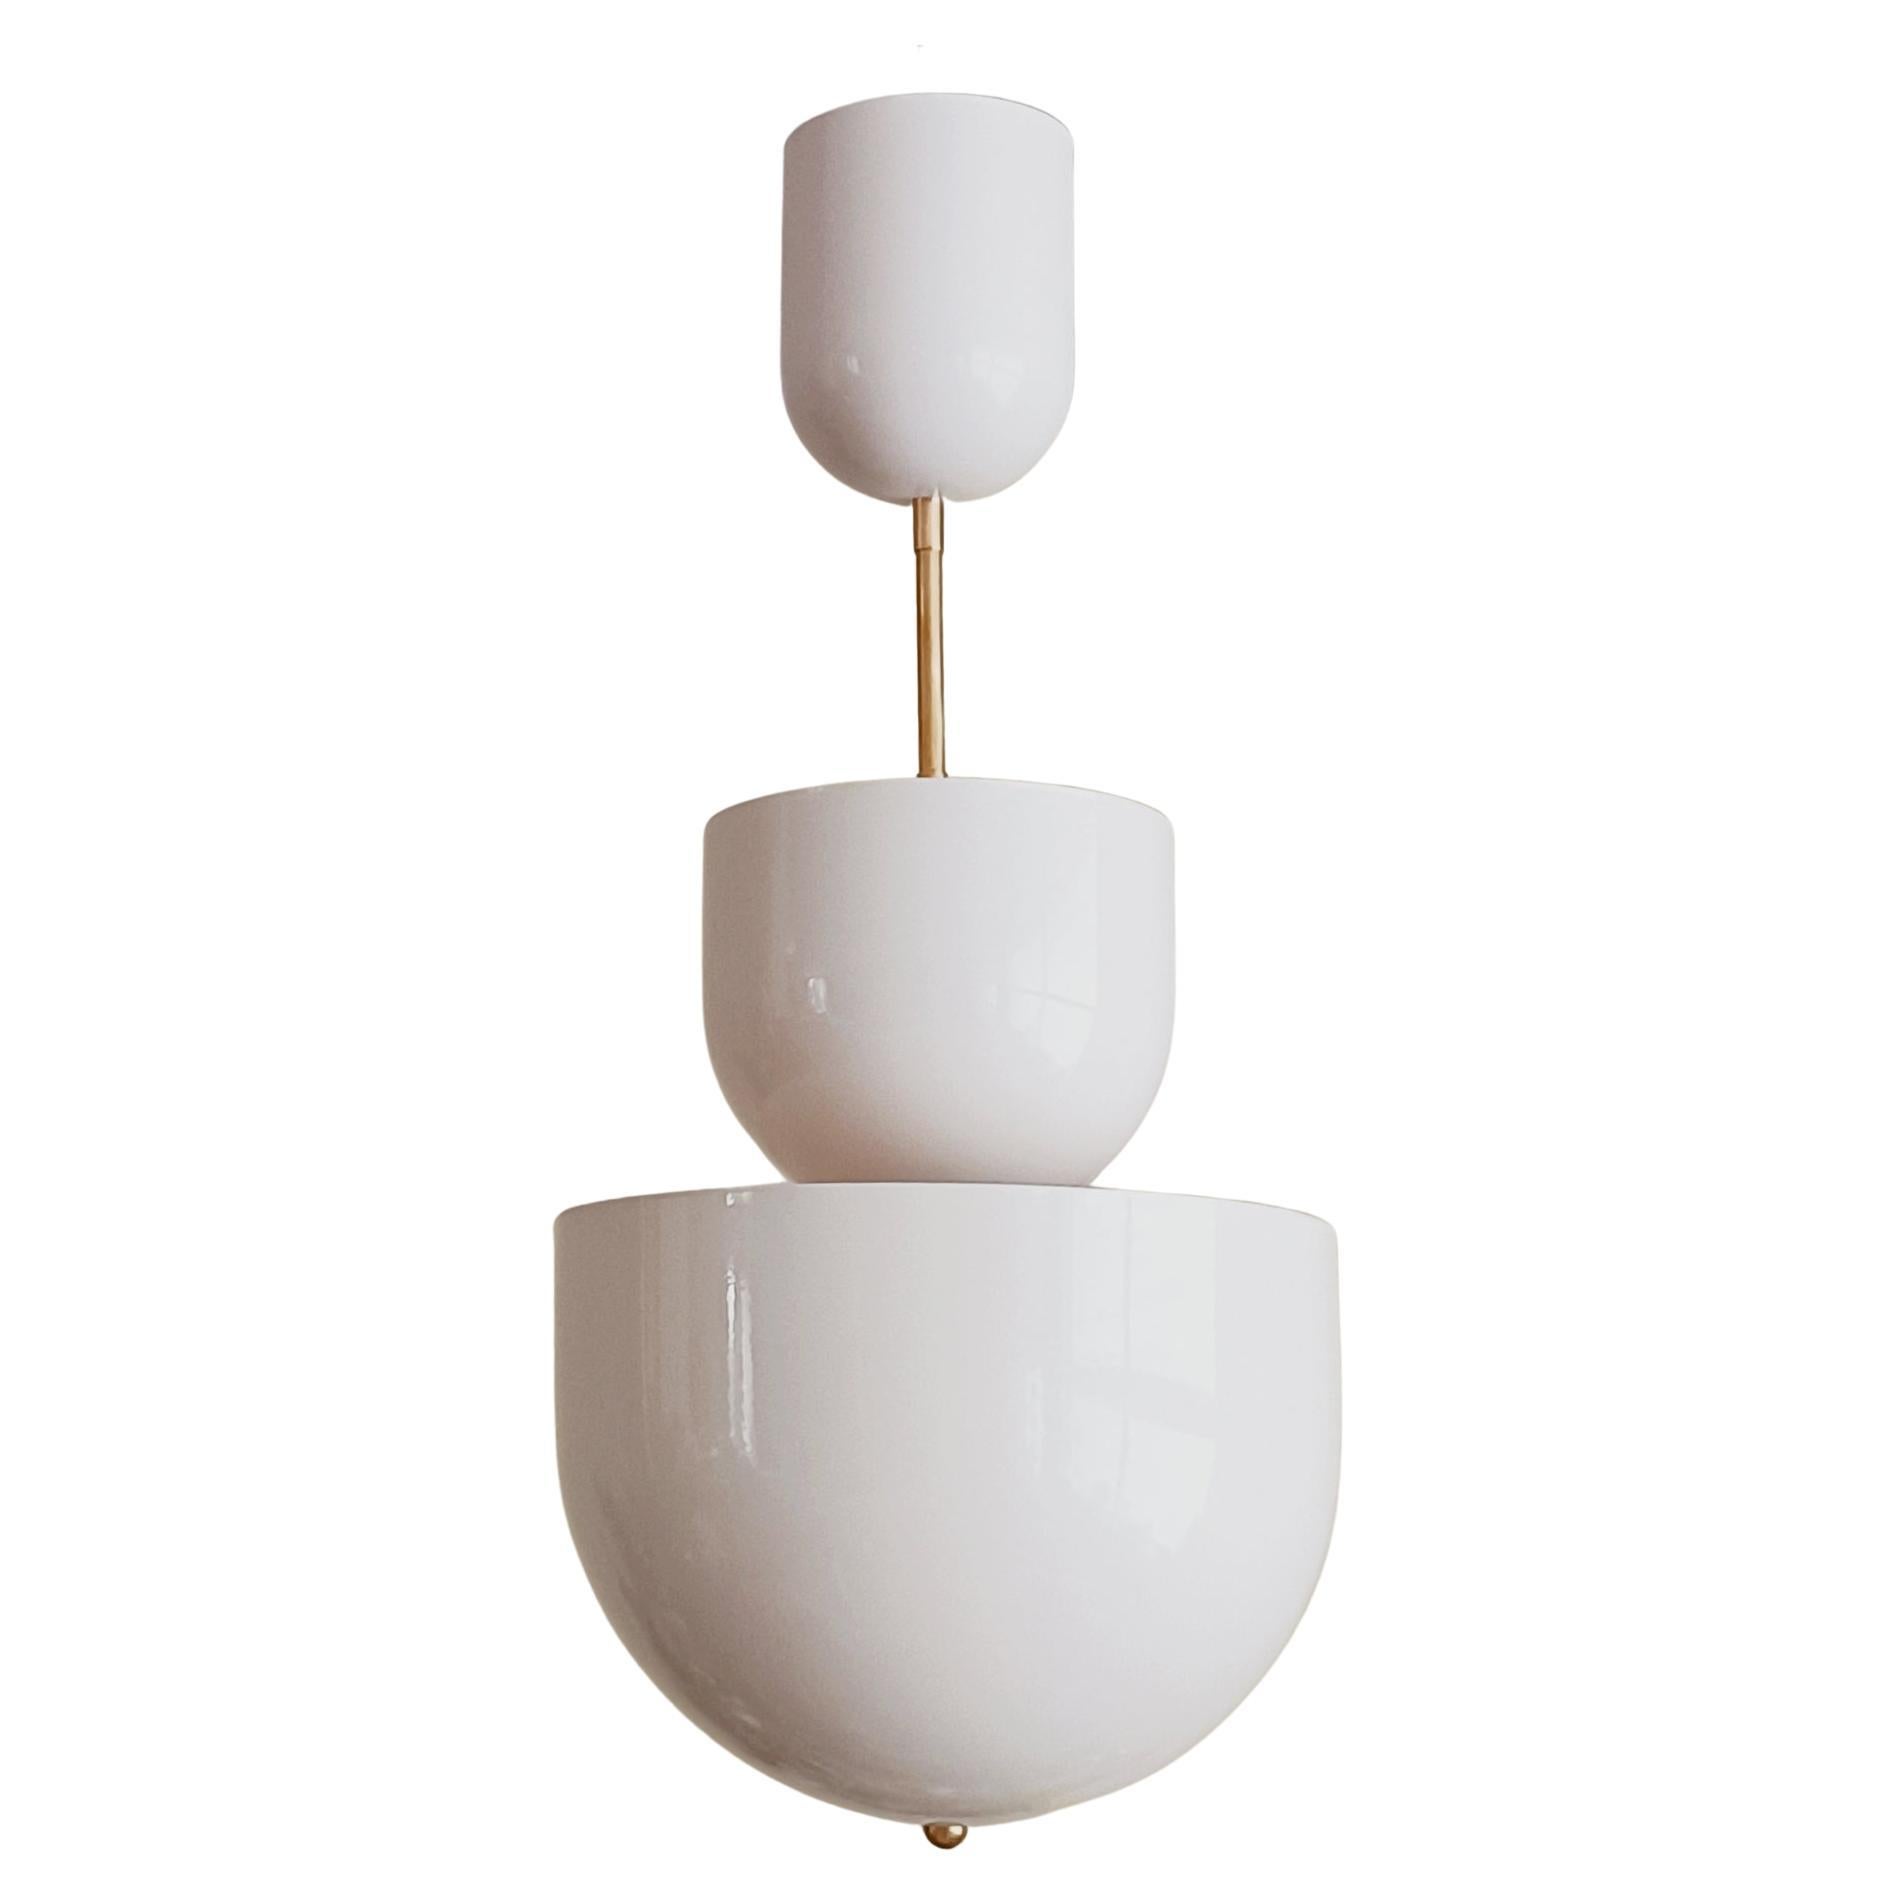 Dobel - large pendant lamp by Candas, White ivory and brass-max diam. 100cm(39") For Sale